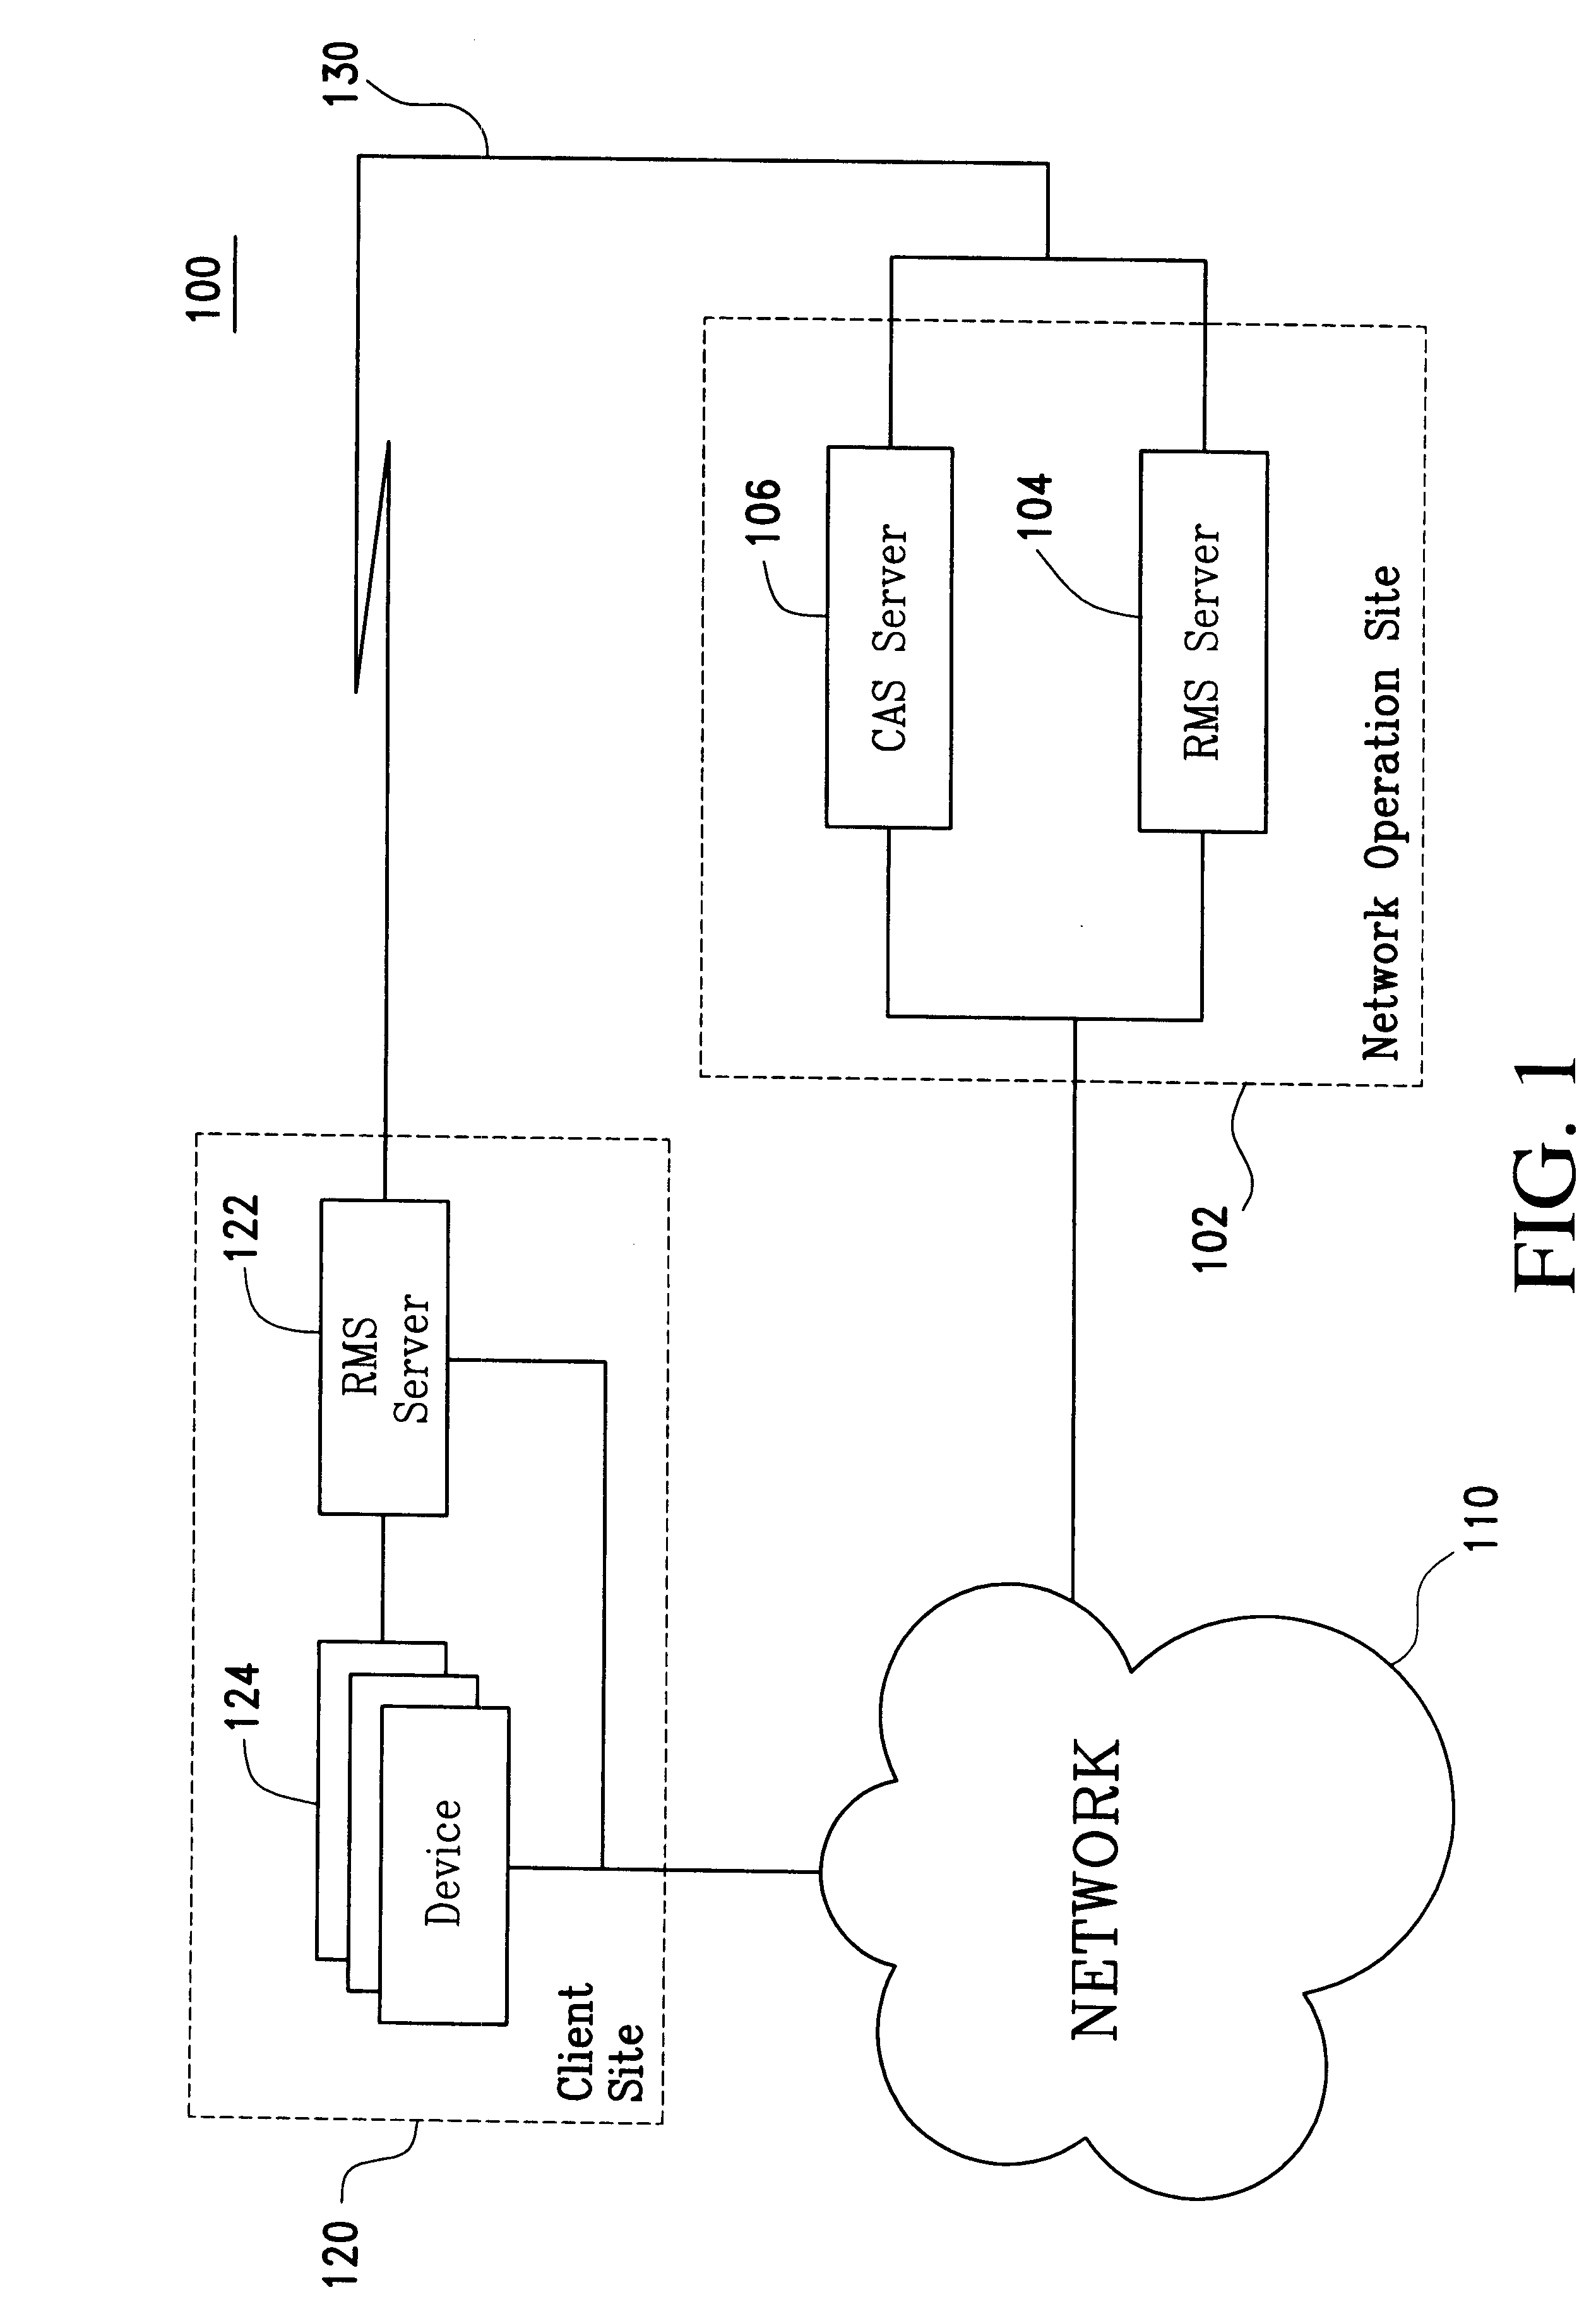 Method, apparatus, and article of manufacture for a network monitoring system